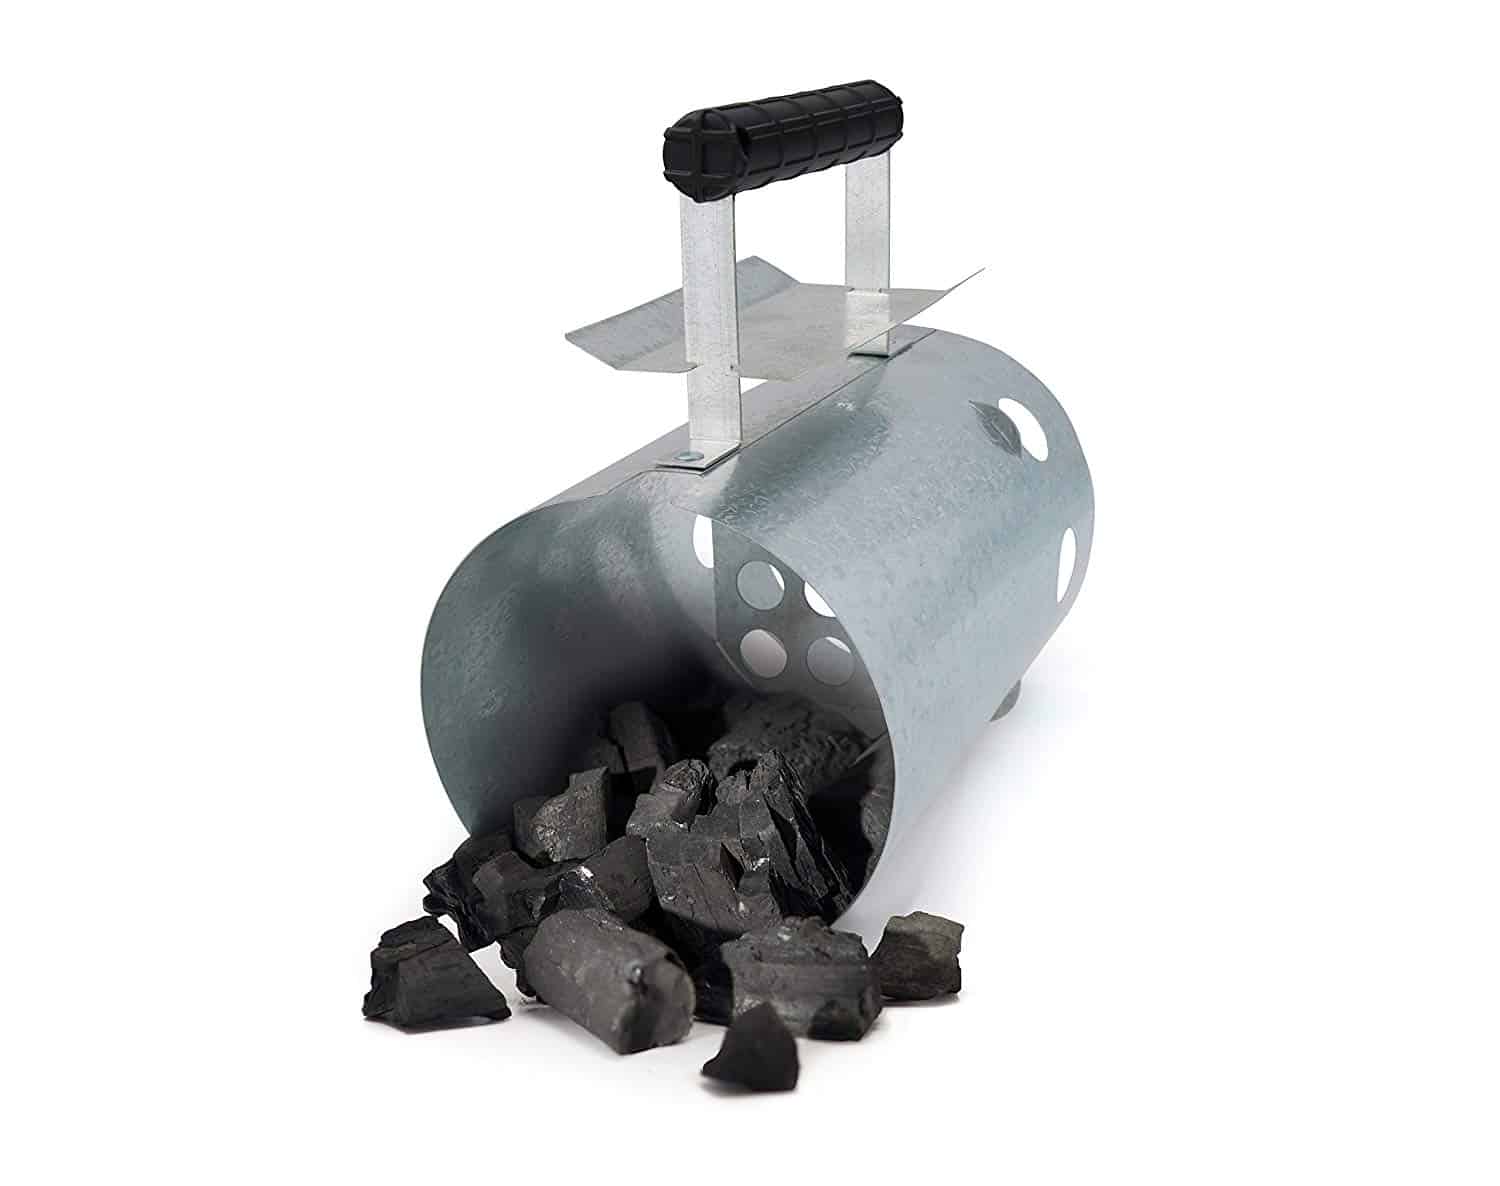 Grill pro charcoal chimney starter